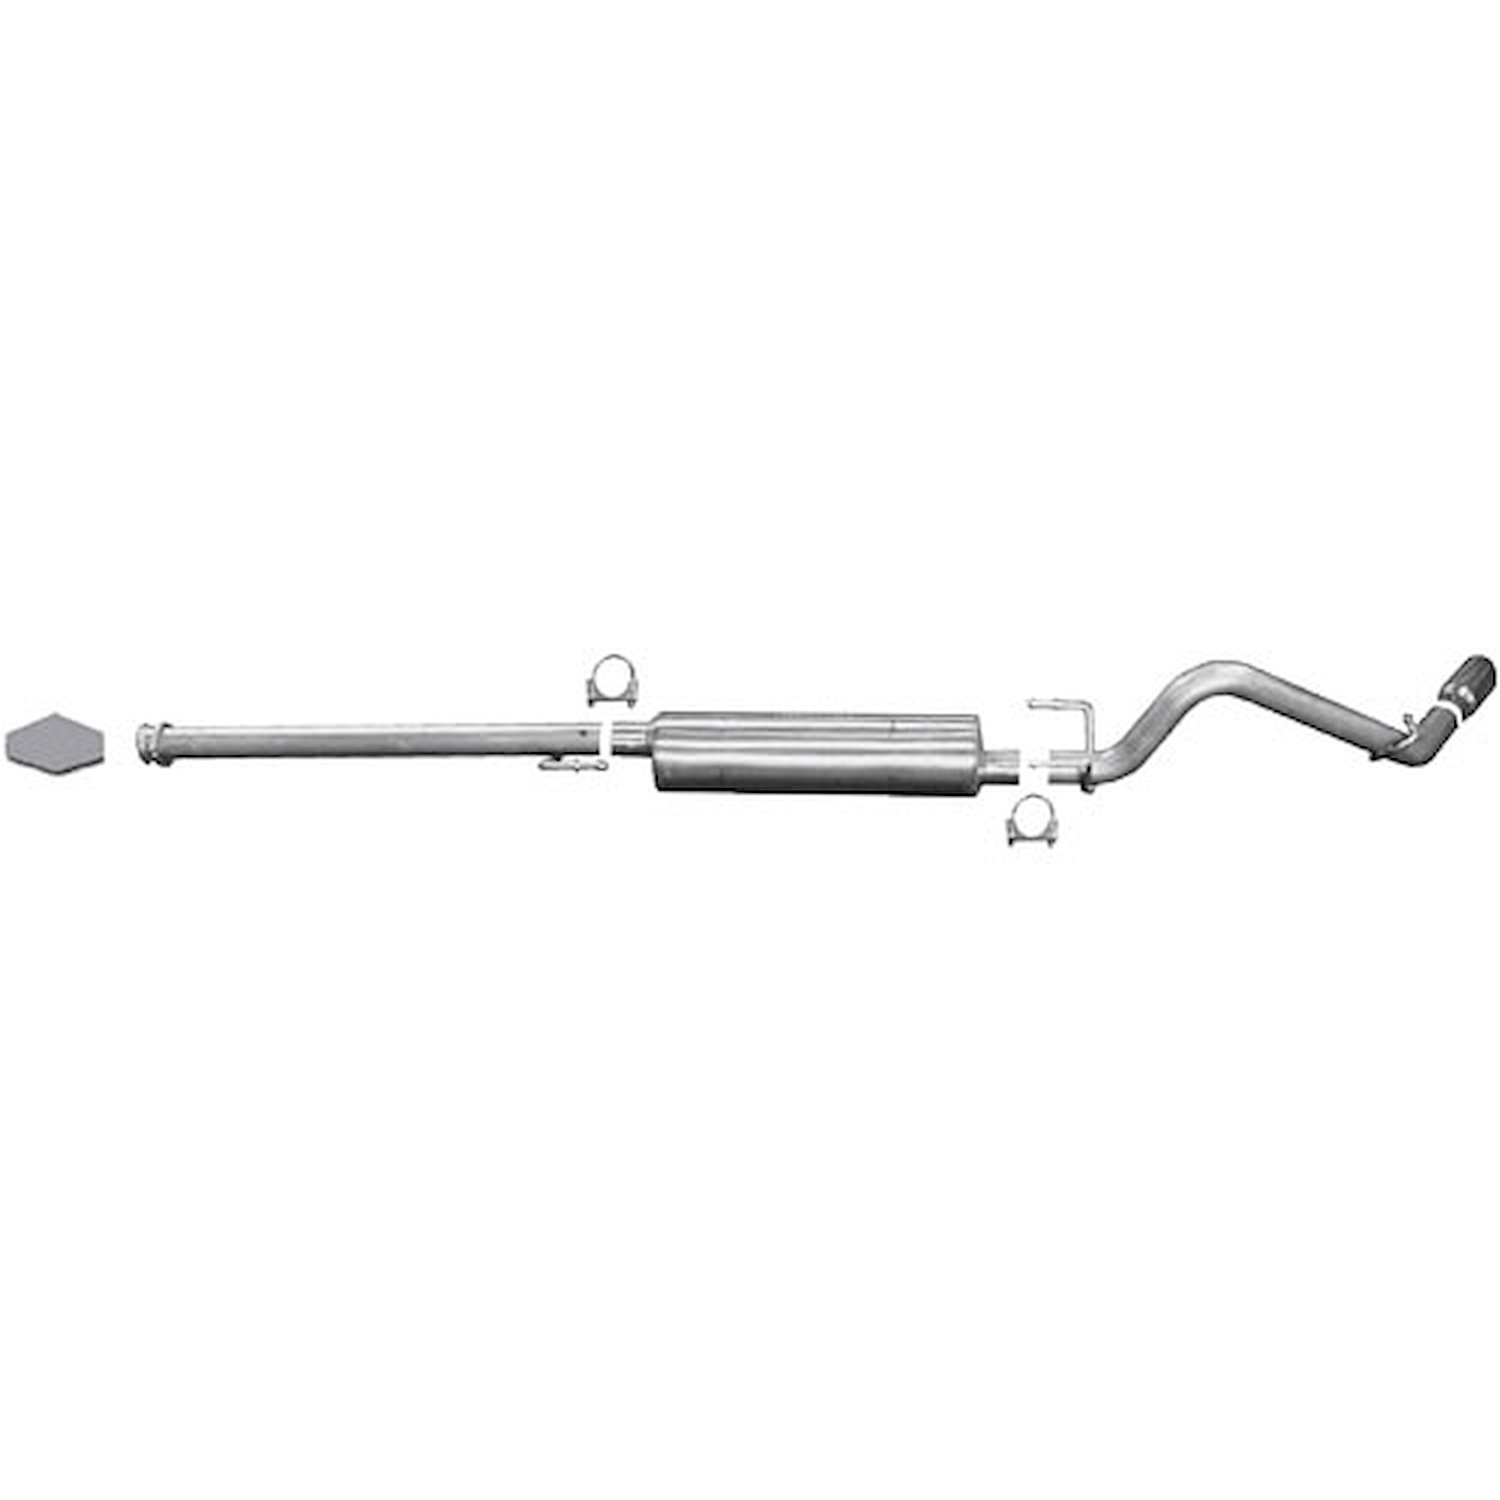 Swept-Side Cat-Back Exhaust 2005-12 Toyota Tacoma 4.0L 2WD/4WD